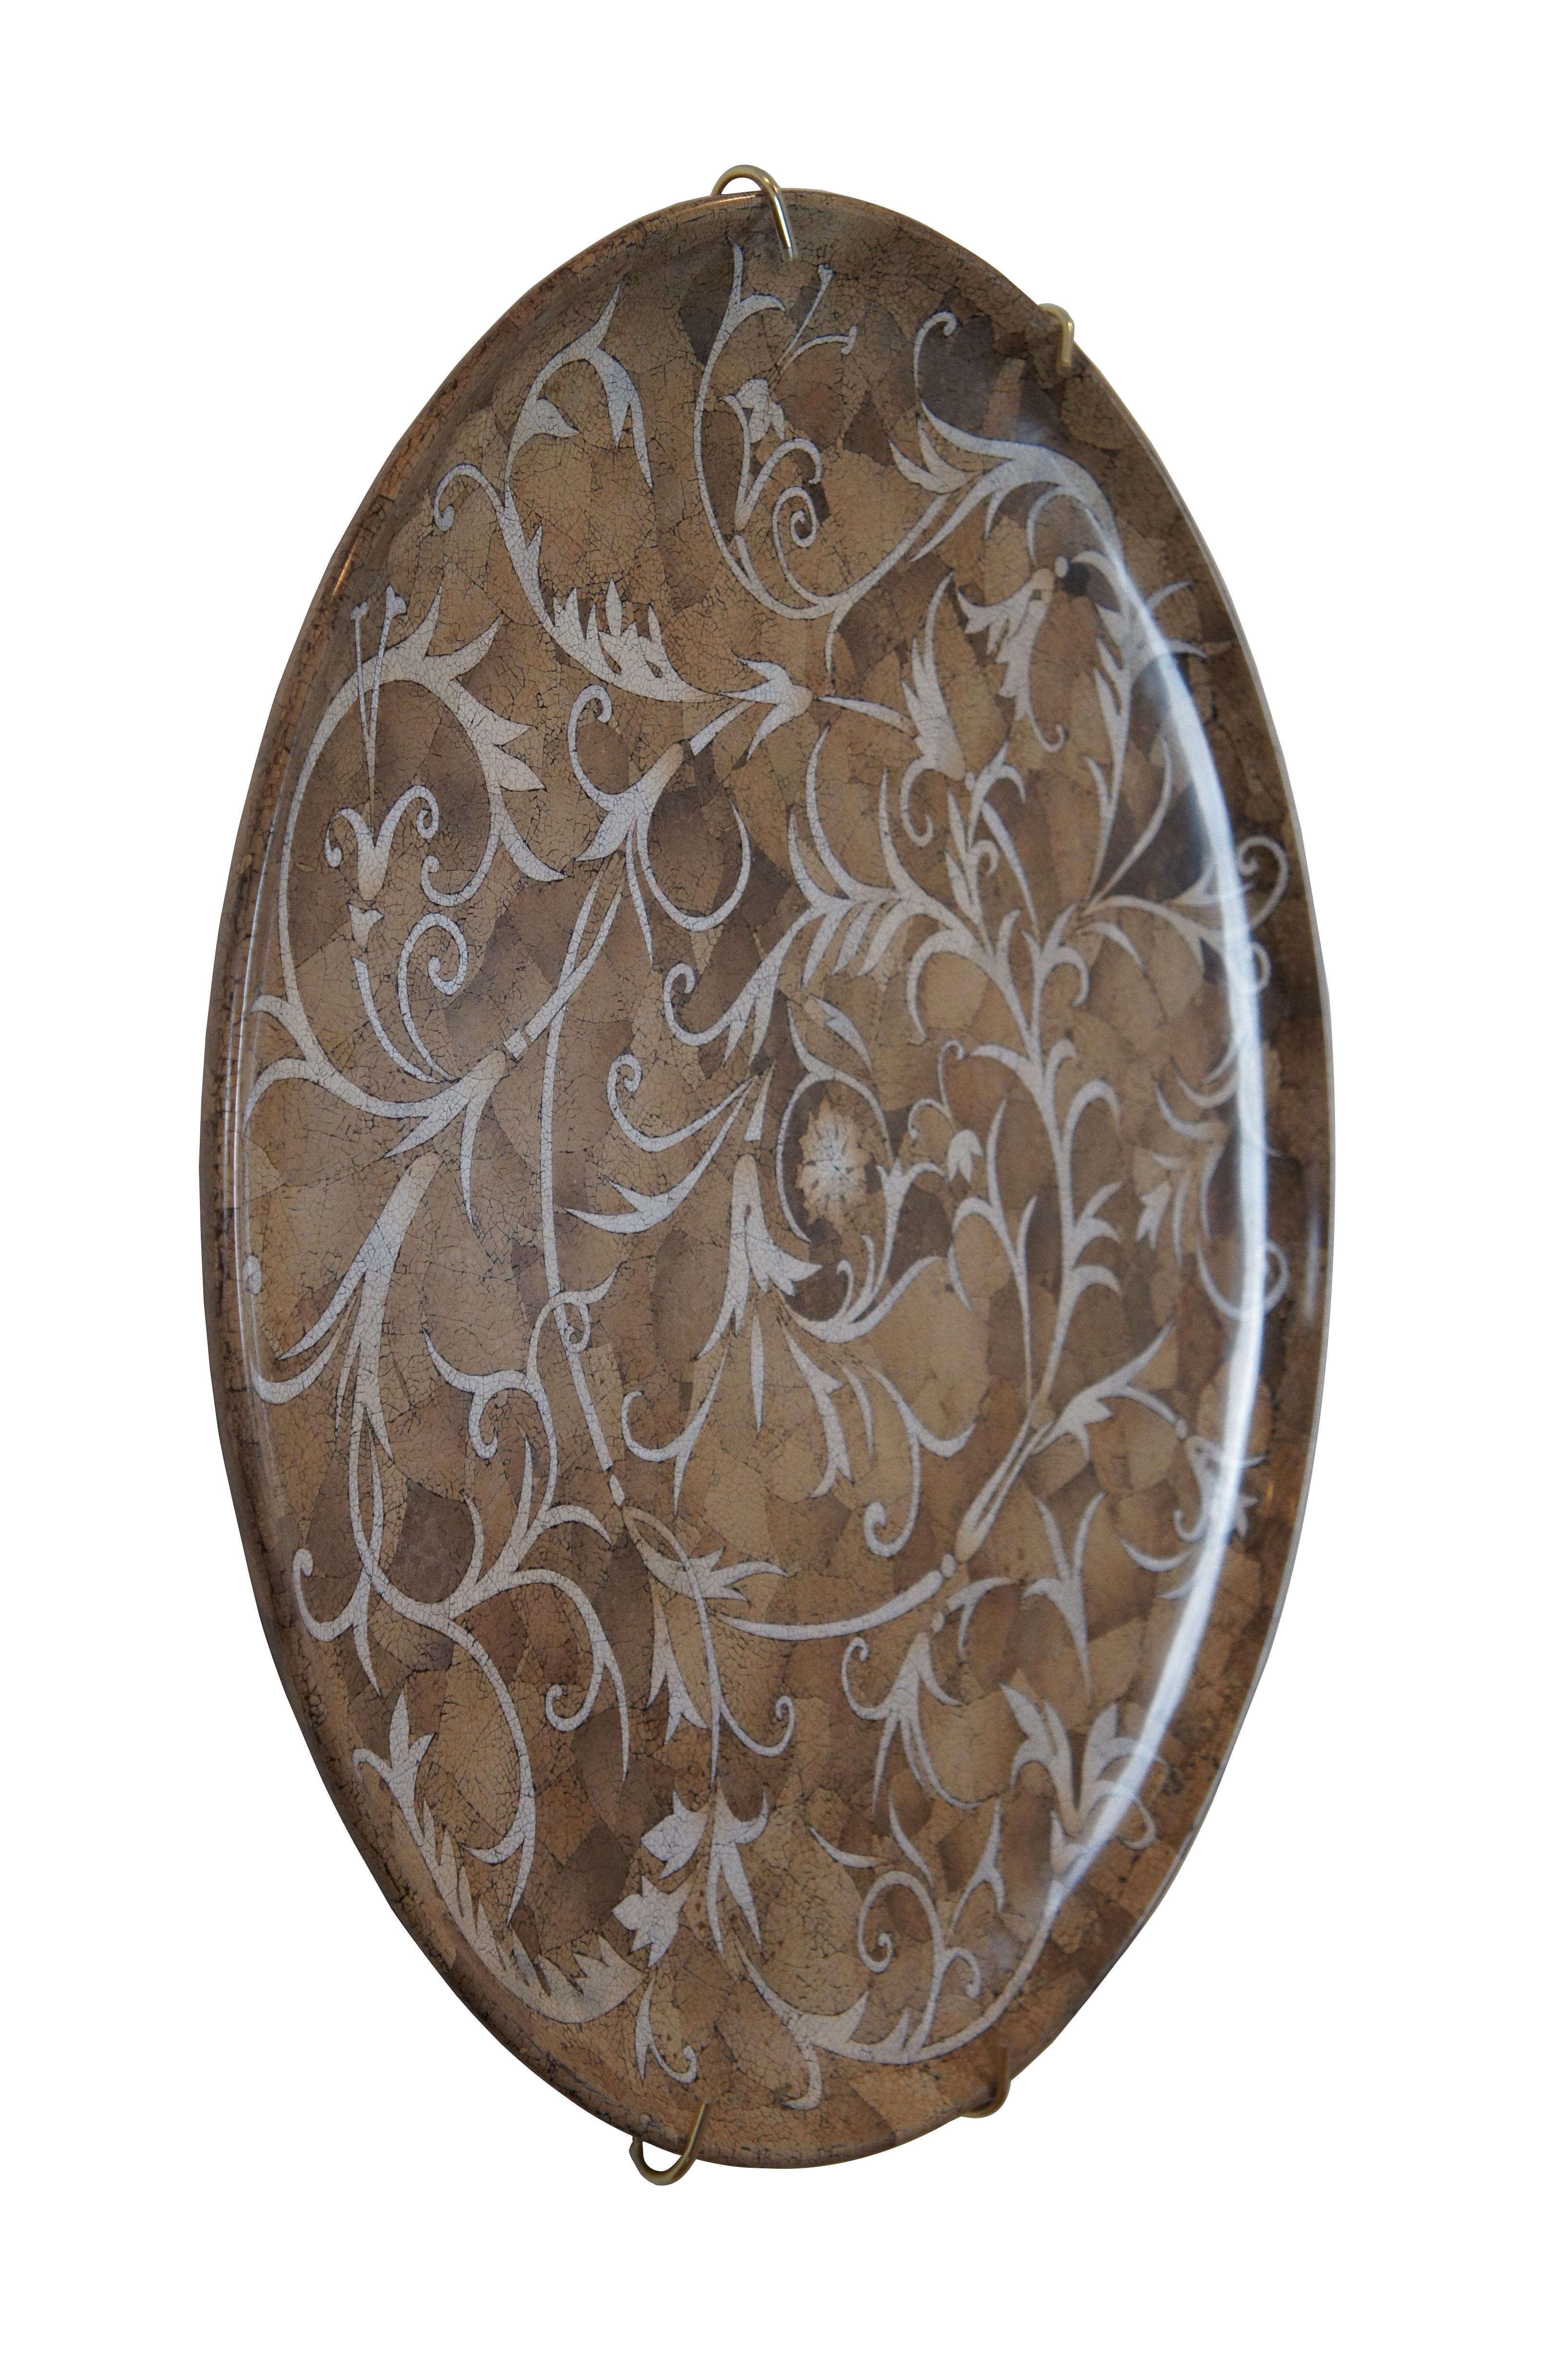 A rare Maitland Smith over sized round Charger / platter / tray featuring a lacquered floral mosaic pattern in shades of brown and white. Includes support for wall hanging.